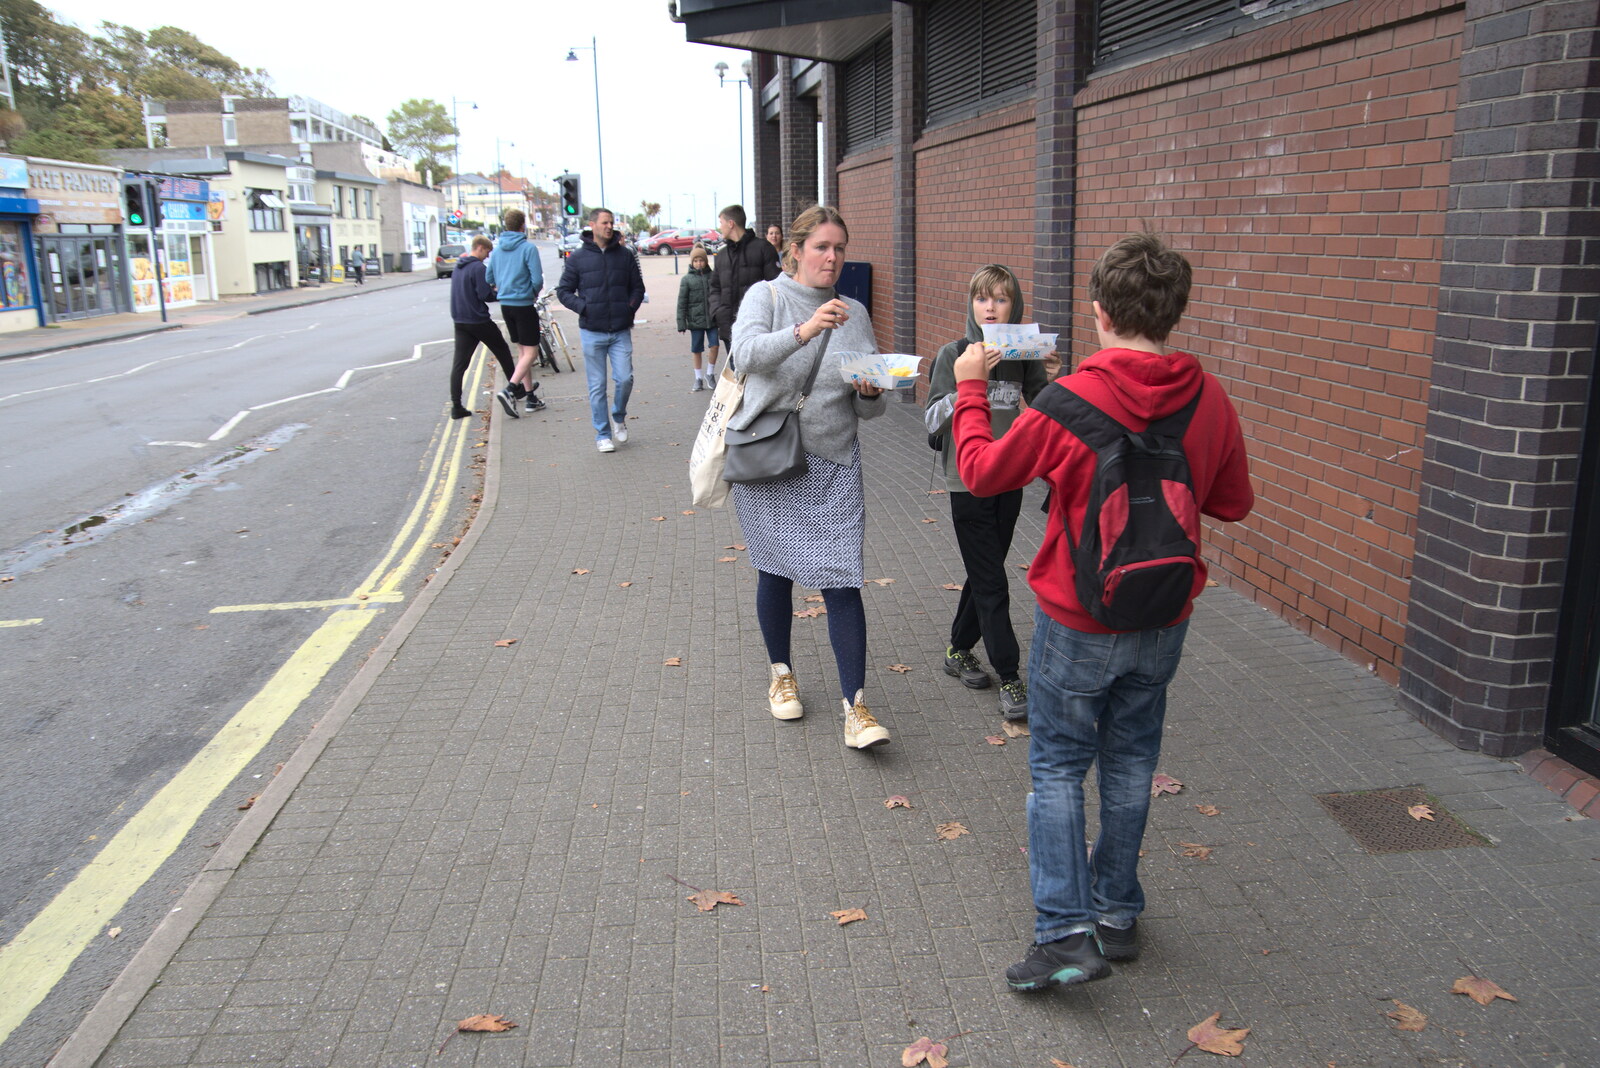 We eat chips as we walk bvack to the car from A Trip to Landguard Fort, Felixstowe, Suffolk - 16th October 2022